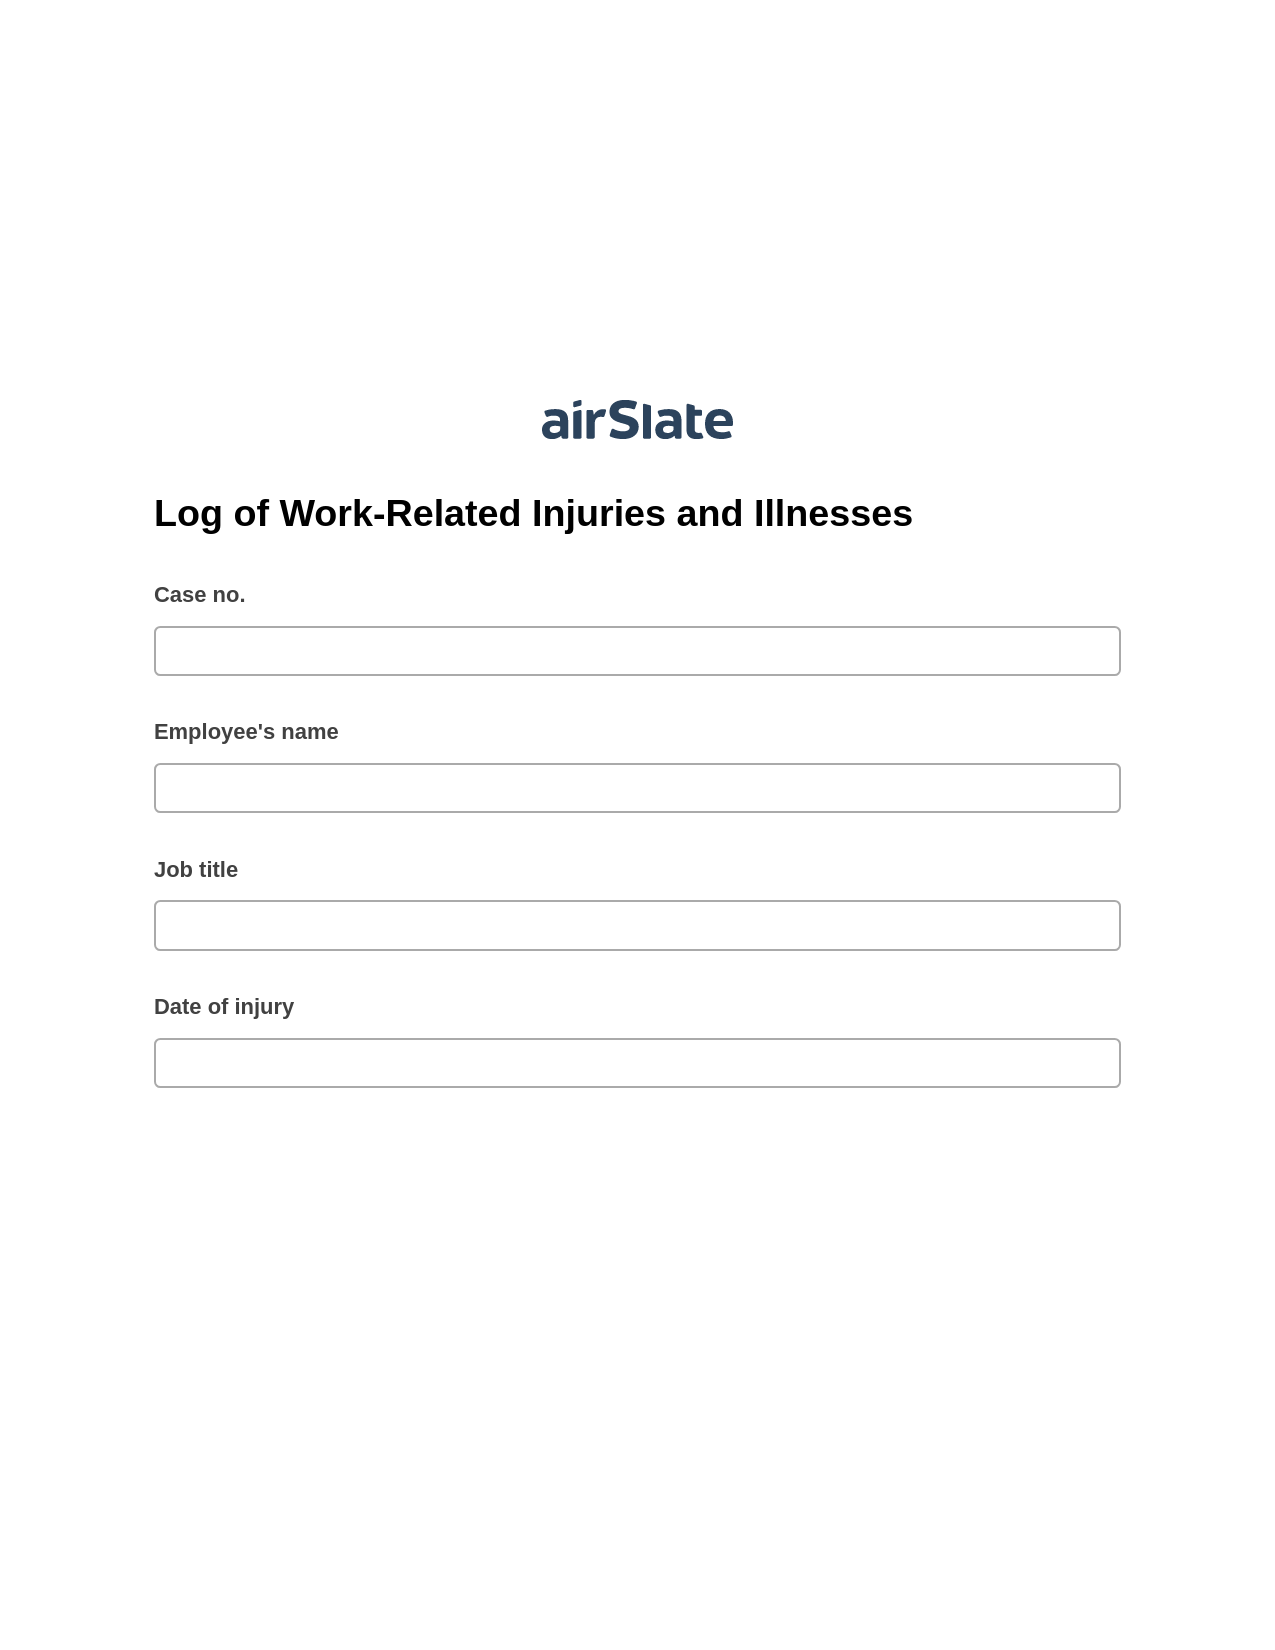 Multirole Log of Work-Related Injuries and Illnesses Pre-fill Slate from MS Dynamics 365 Records Bot, Update Salesforce Record Bot, Box Bot